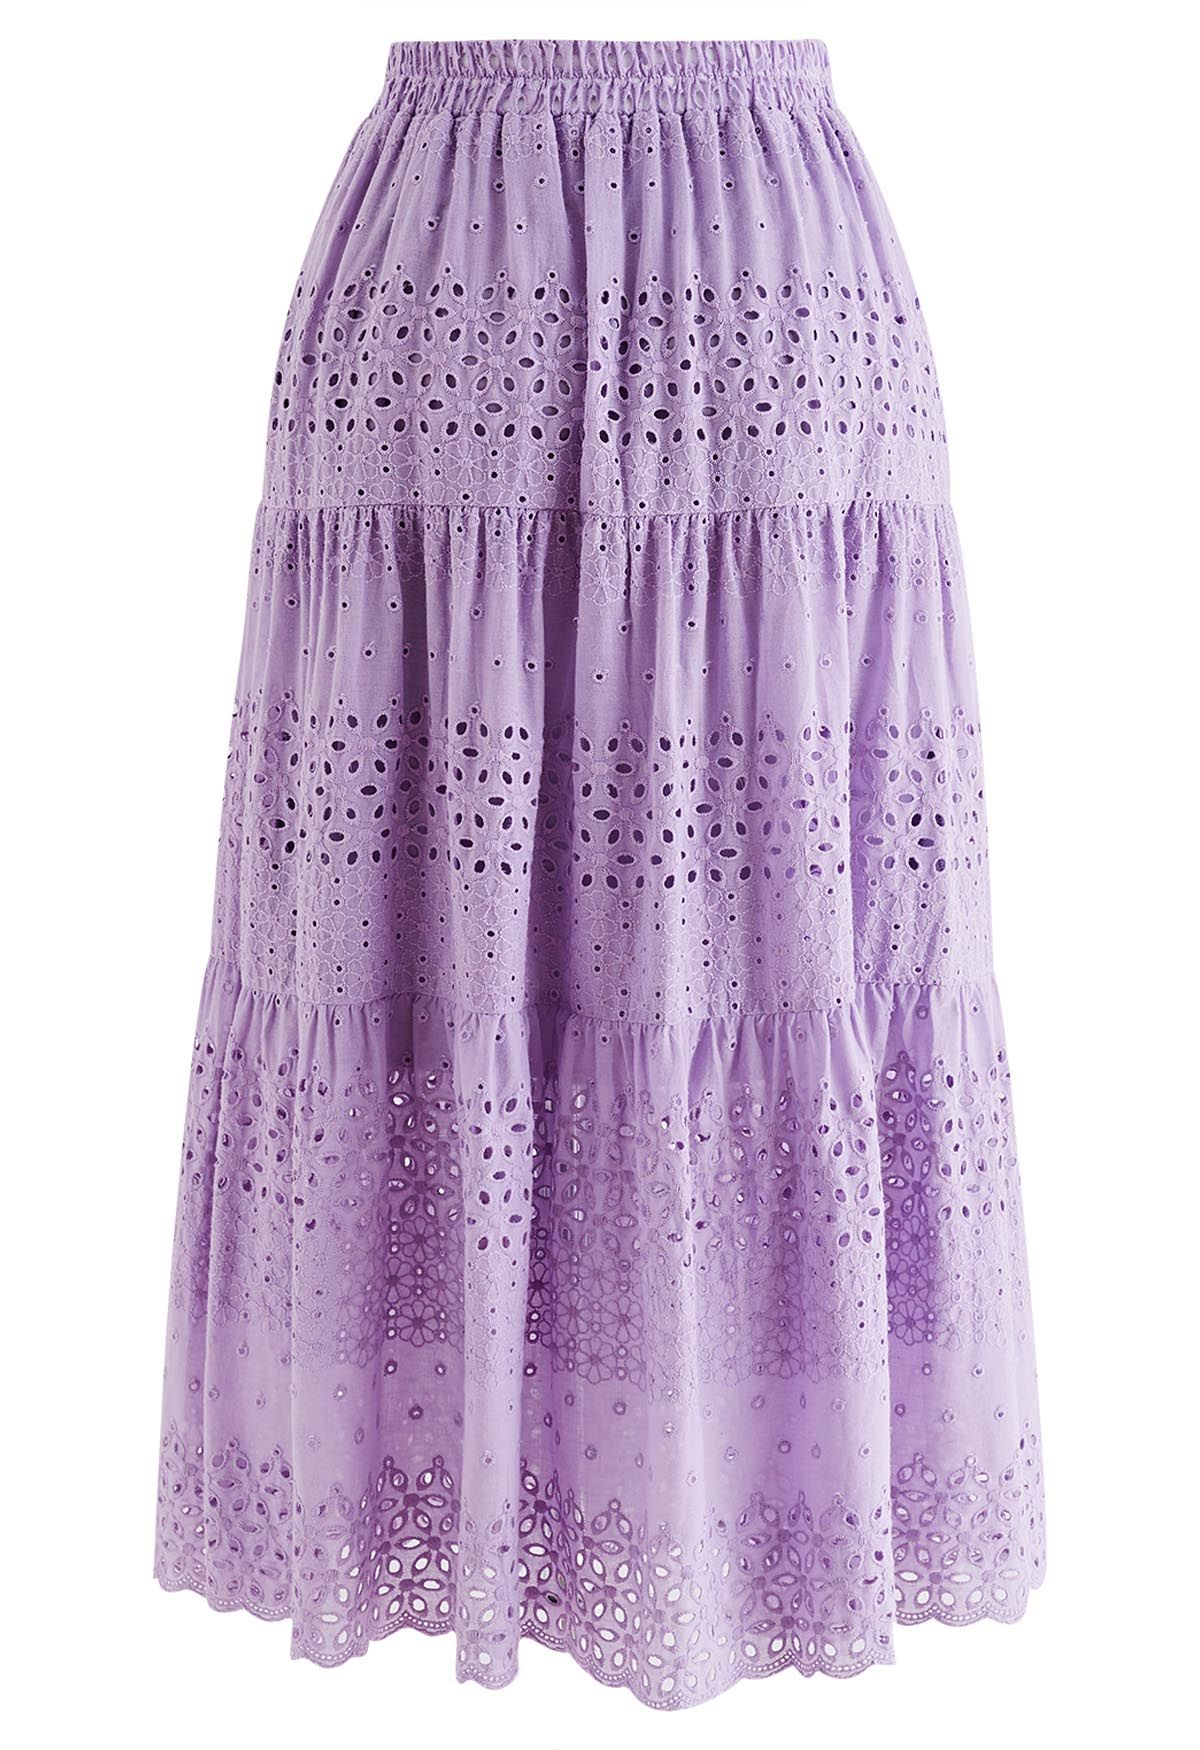 Floret Embroidered Eyelet Cotton Midi Skirt in Lilac